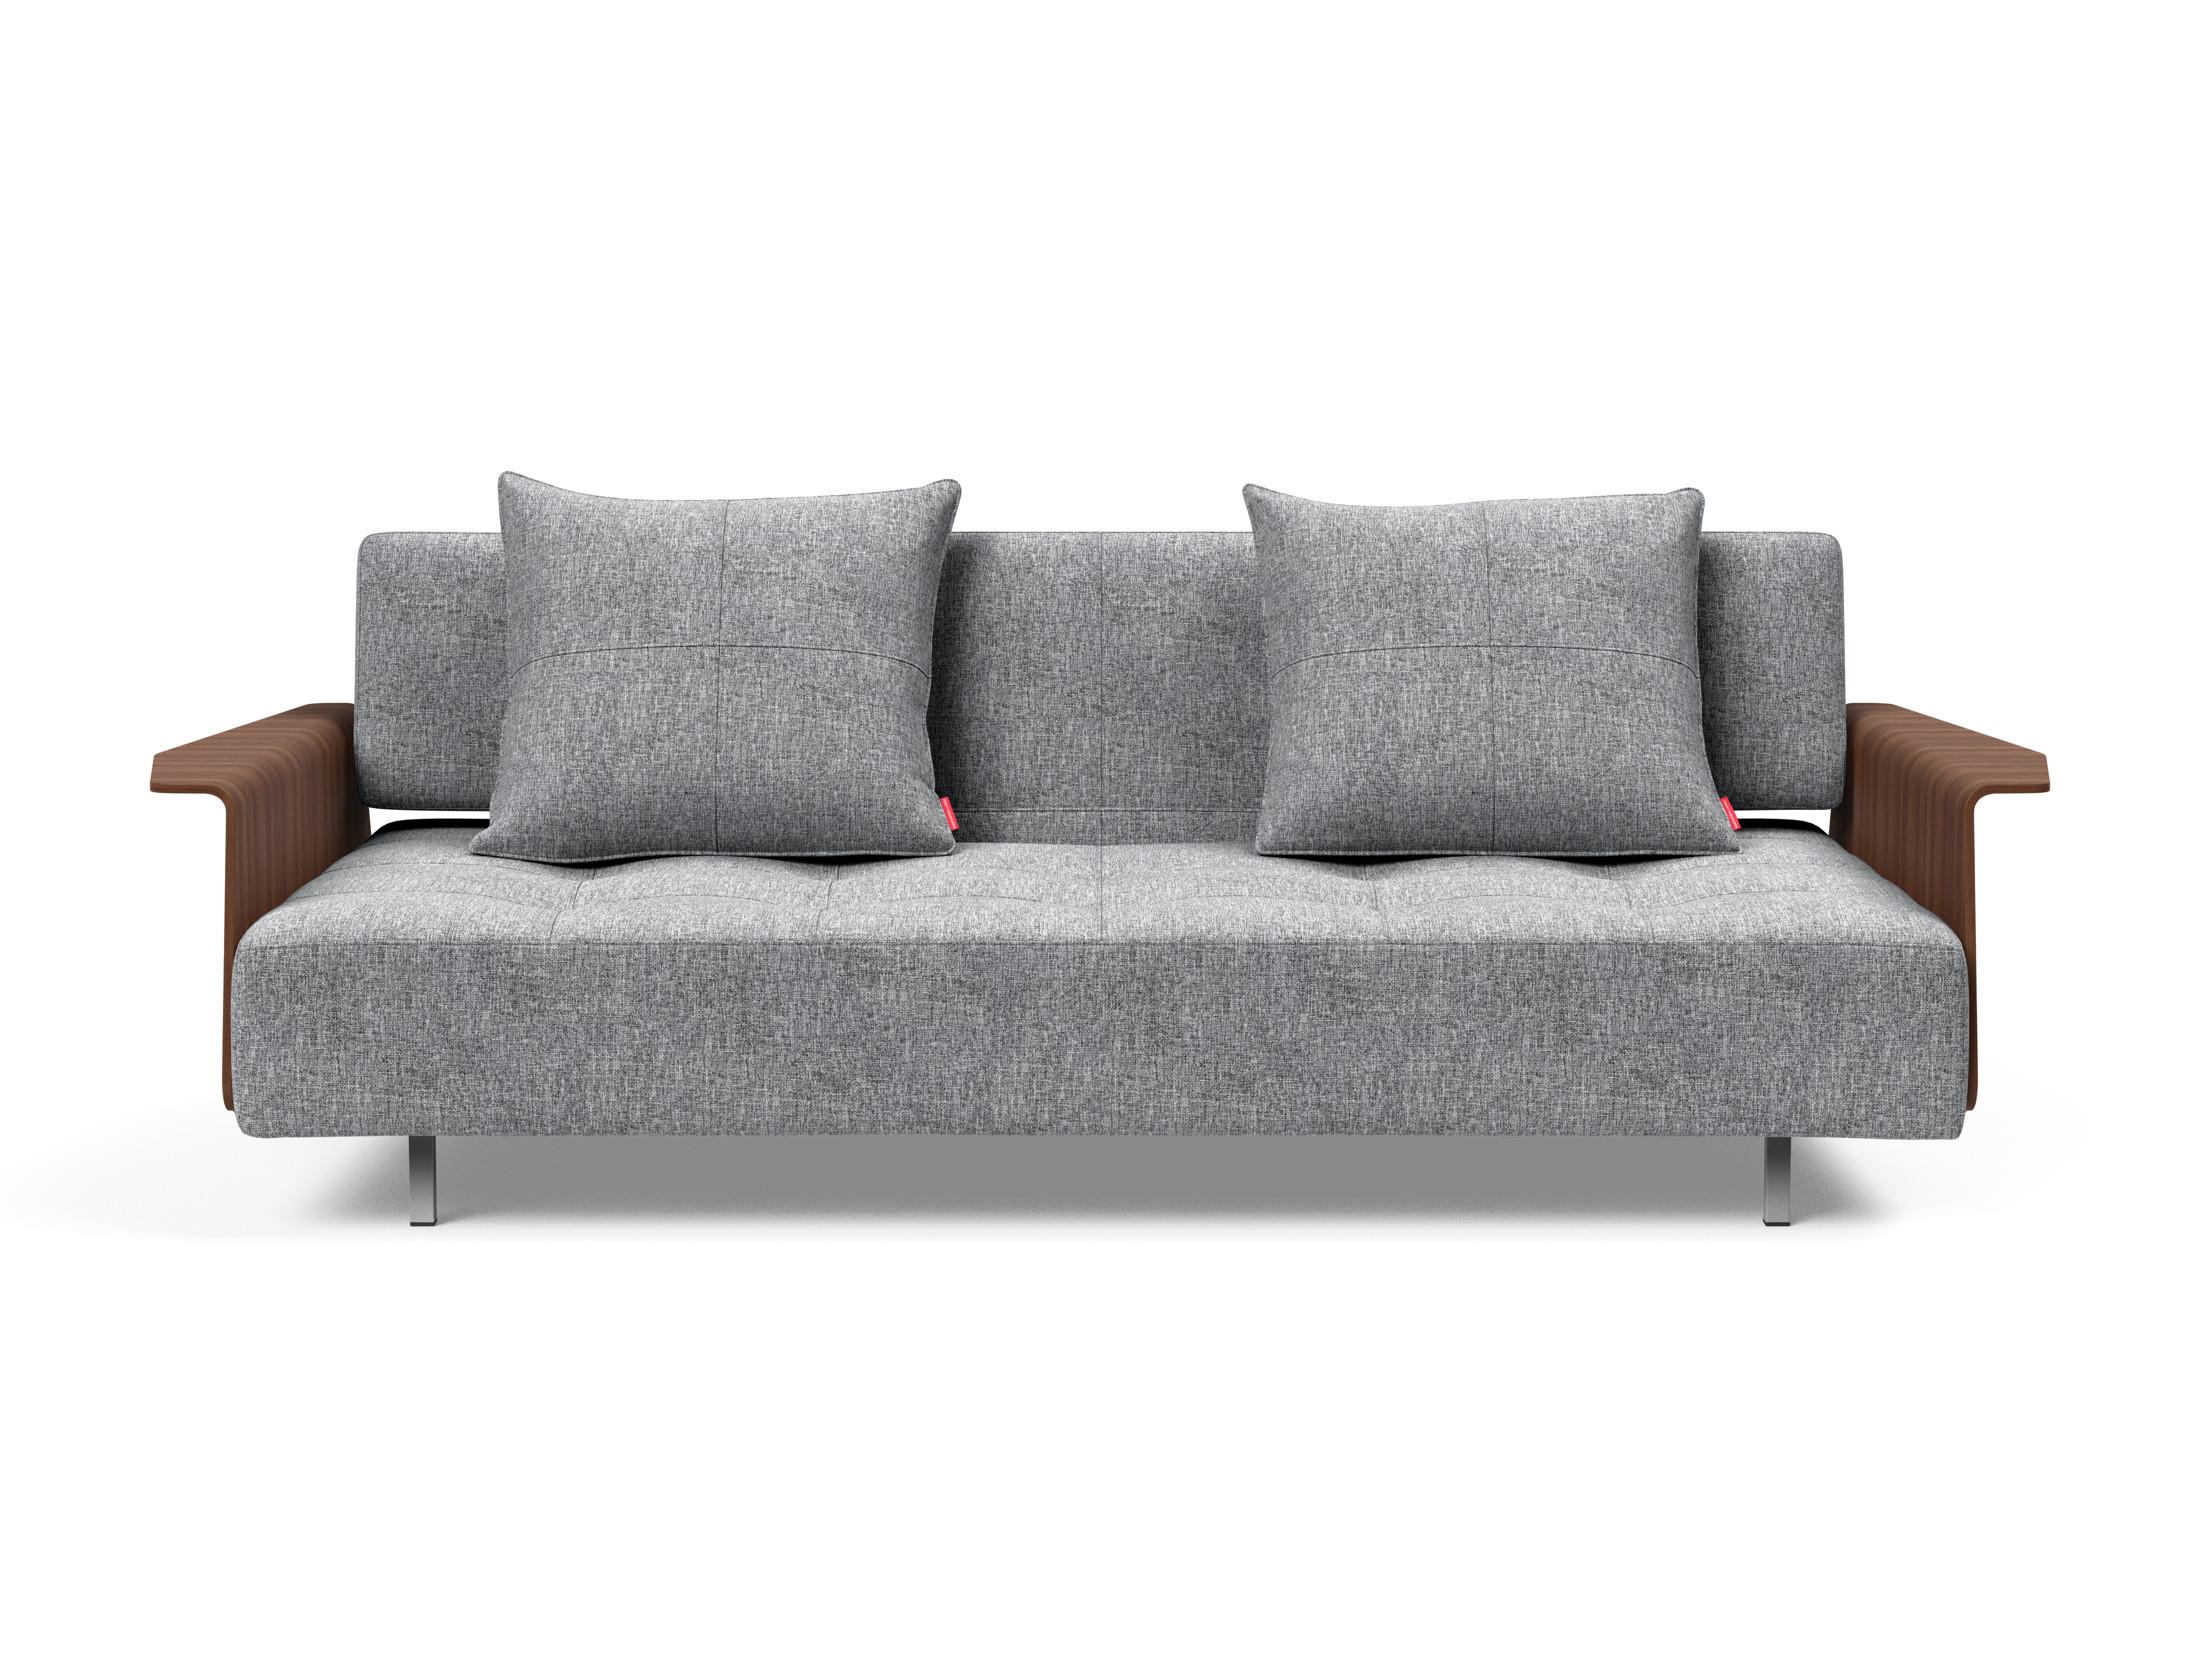 Long-Horn-EL-Sofa-Bed-With-Arms-565-p1-web